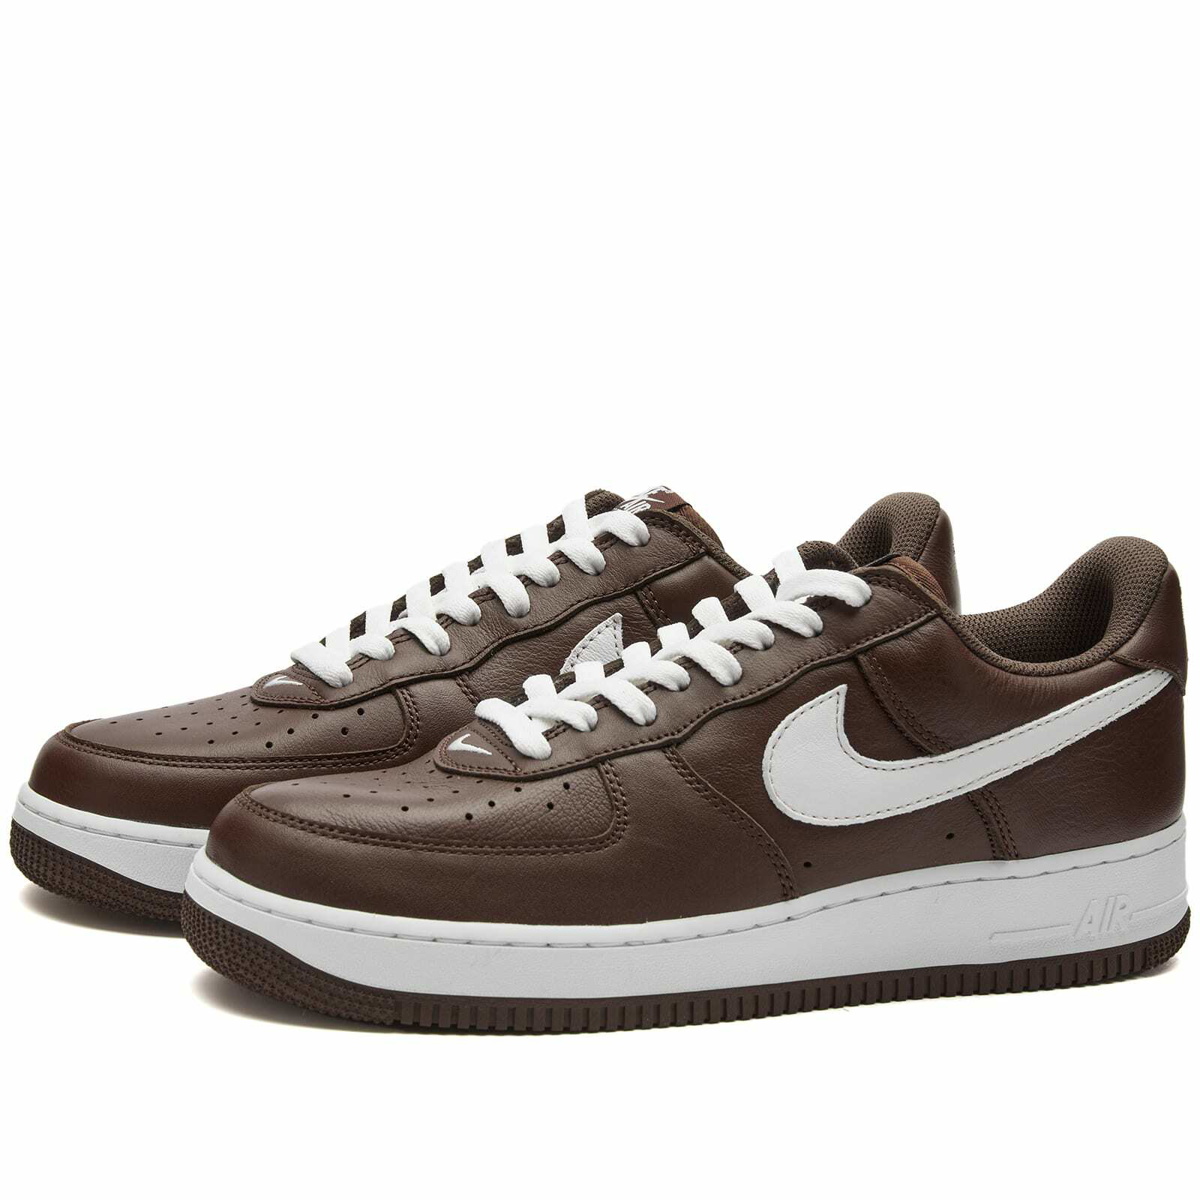 Nike Air Force 1 Low Retro Qs Sneakers in Chocolate/White Nike